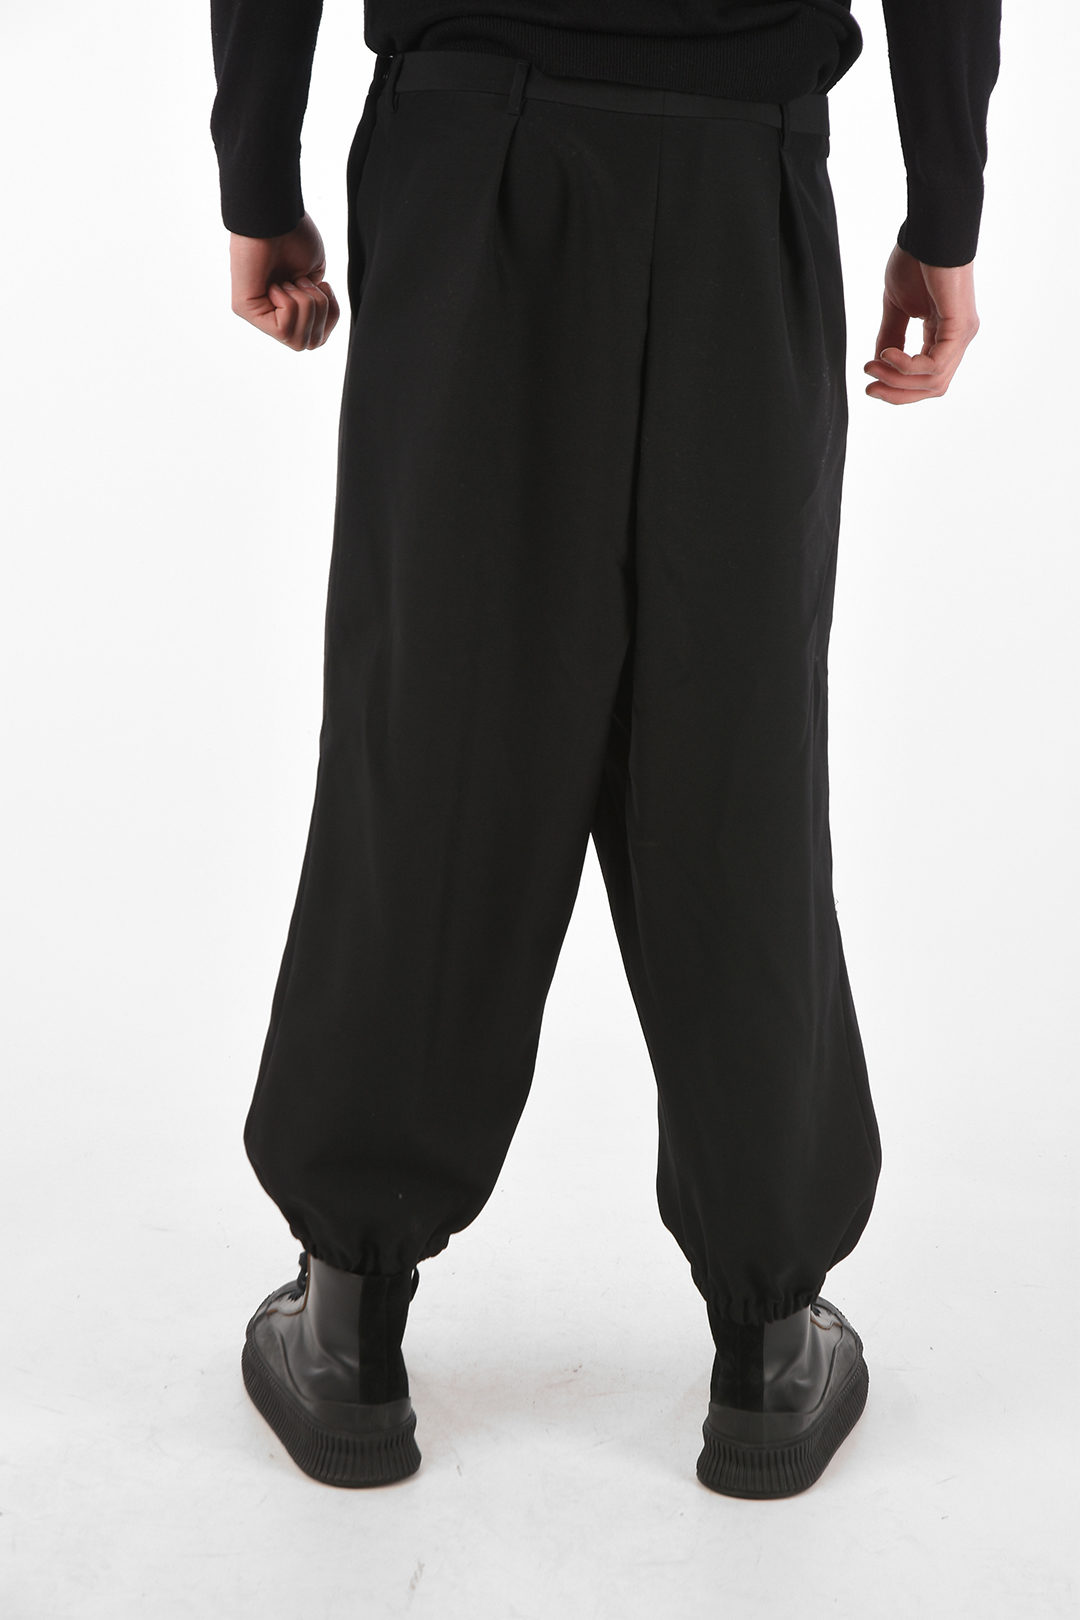 Saint Laurent Wool Pants with Elastic Ankle Band men - Glamood Outlet